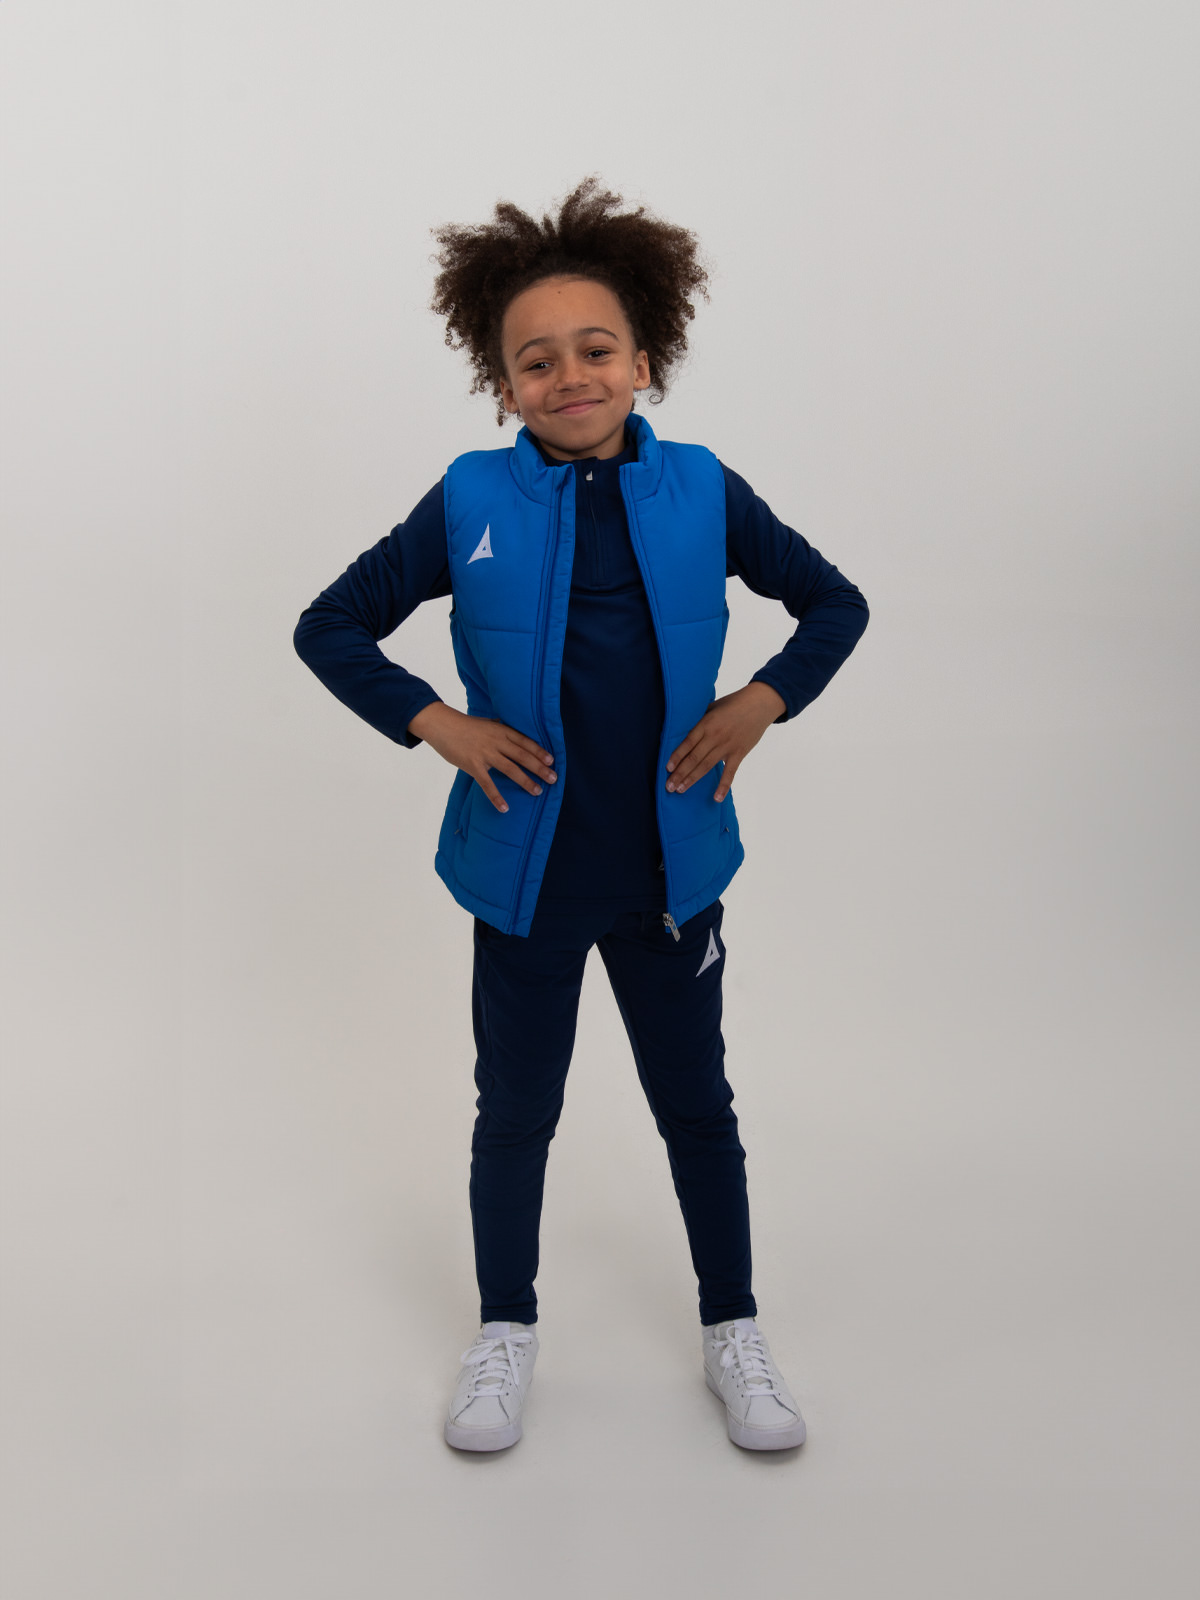 a kid is wearing an unzipped royal blue padded gilet over the top of a jumper to keep warm.